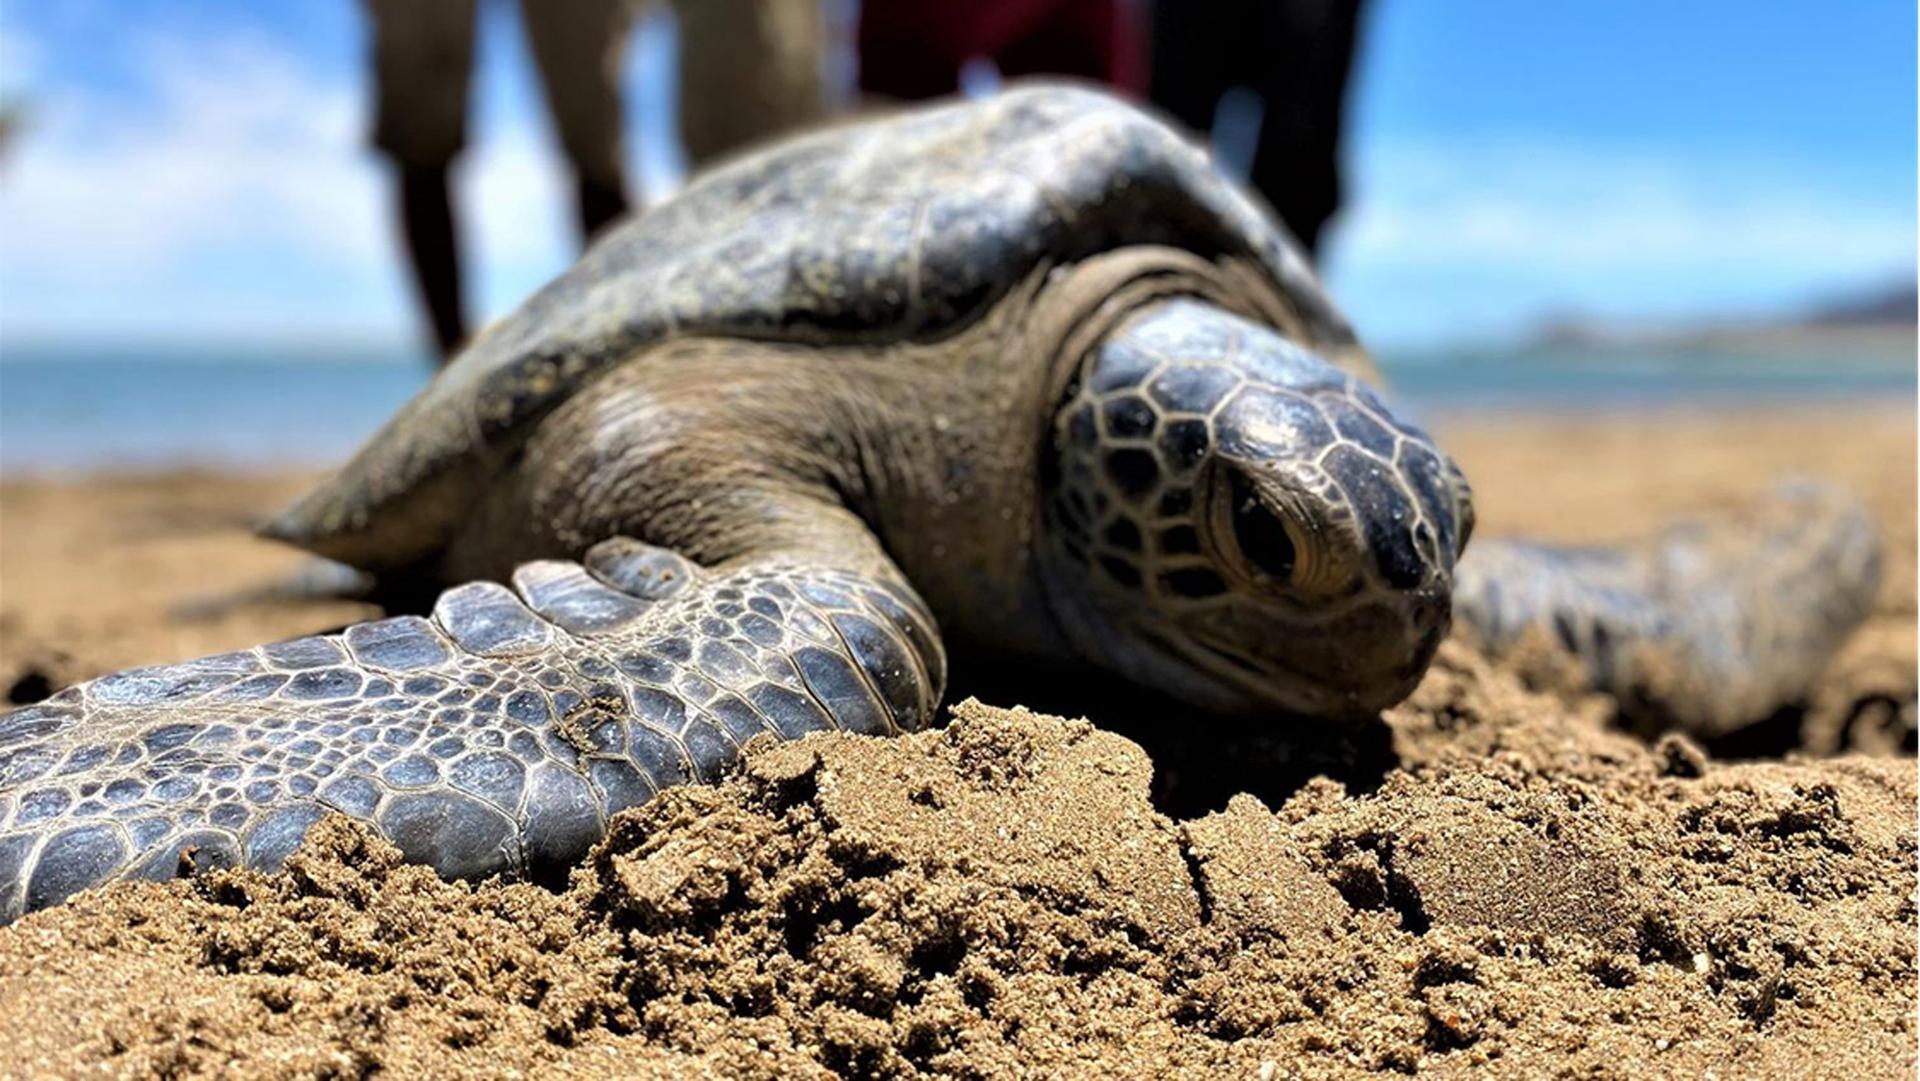 A sea turtle heads back to the ocean after the tortugueros have finished gathering data on it